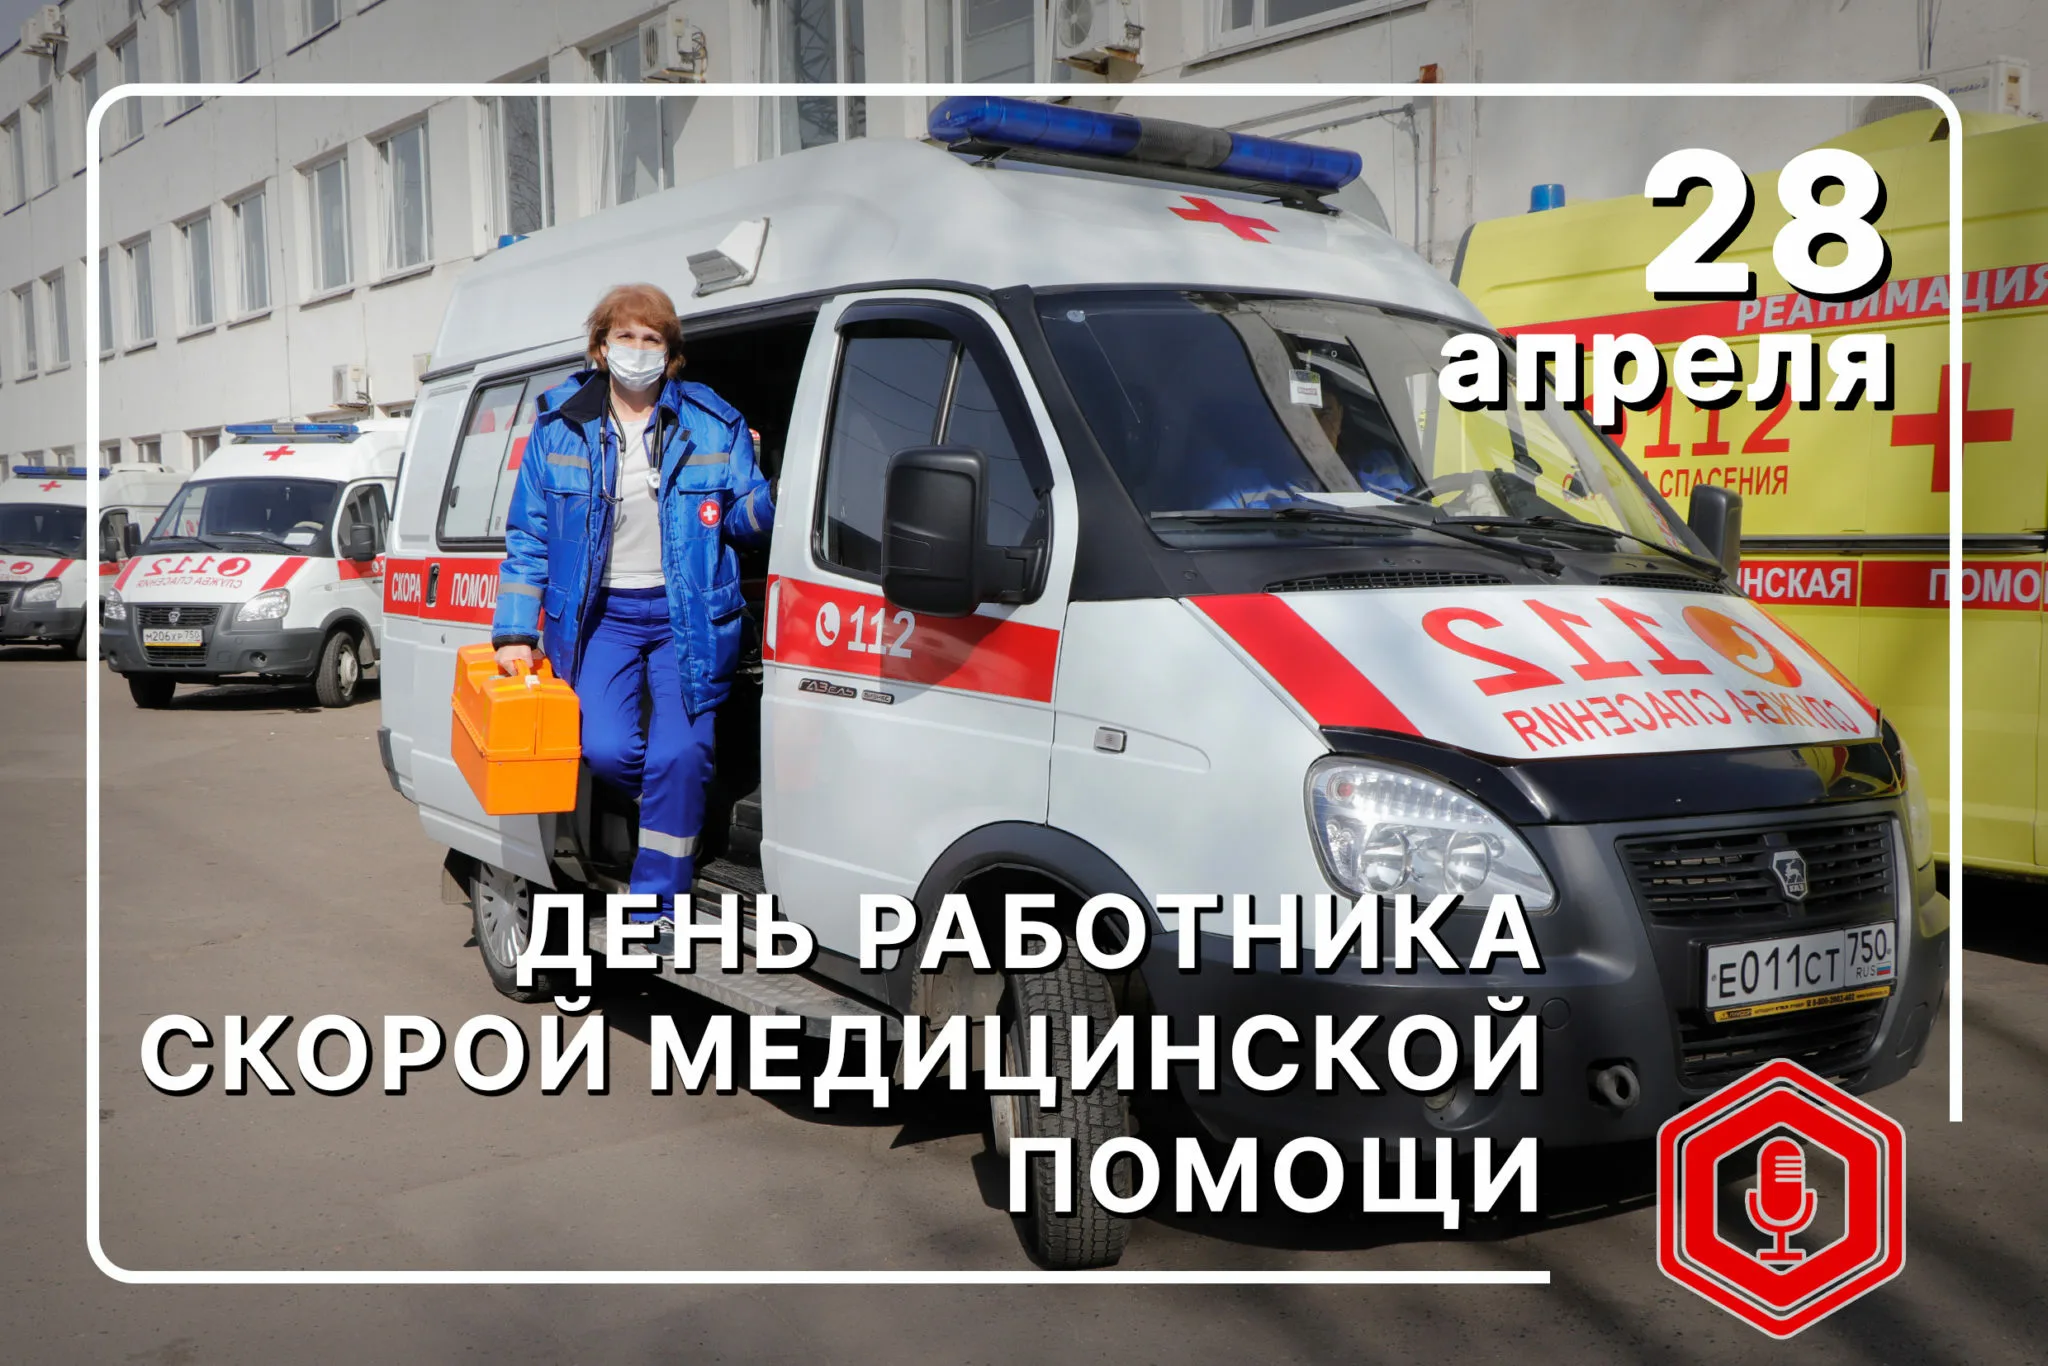 Фото Congratulations on Ambulance Day to colleagues #12